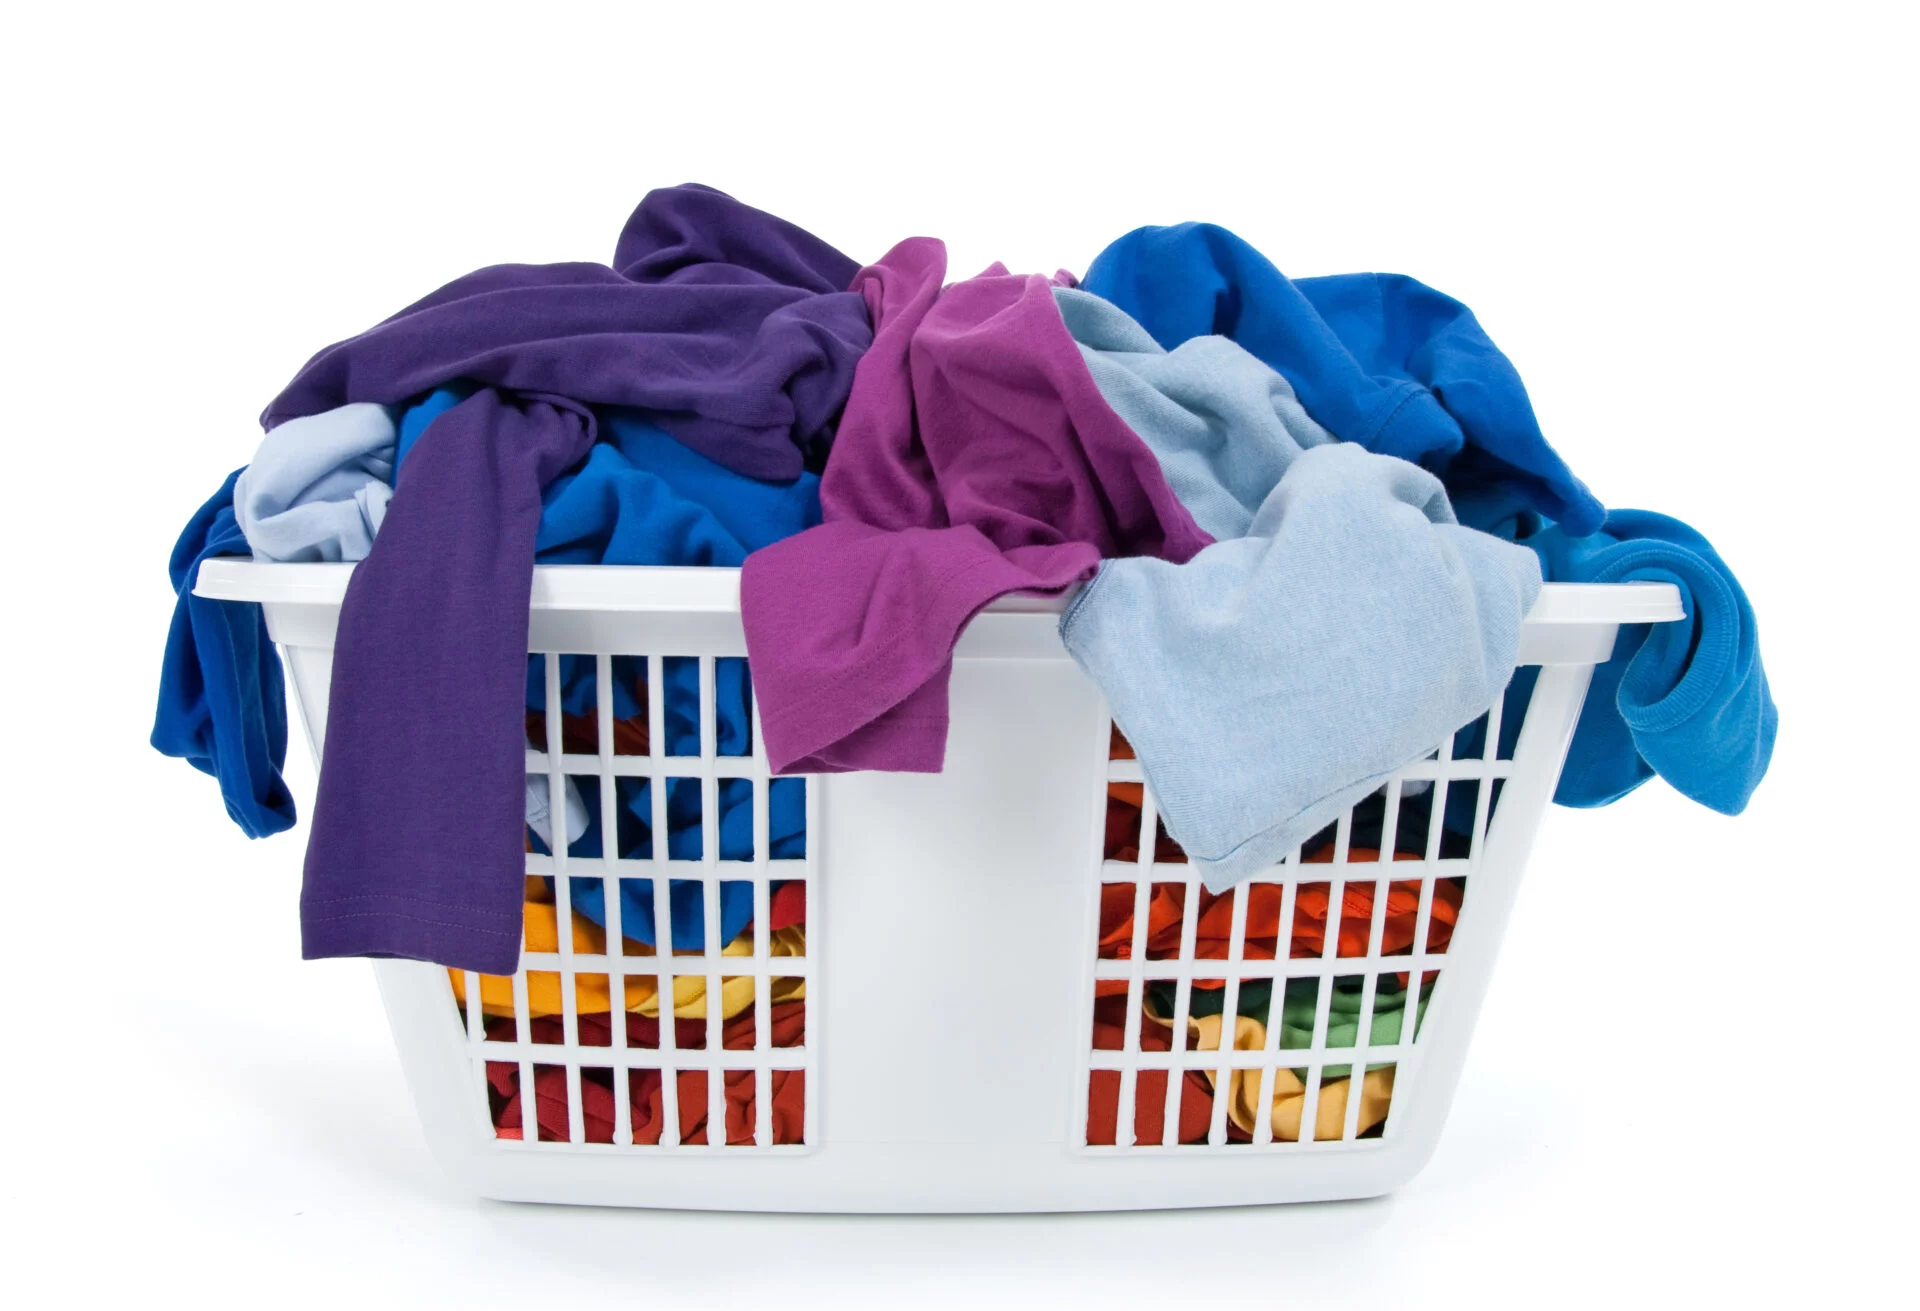 Colorful clothes in a laundry basket on white background